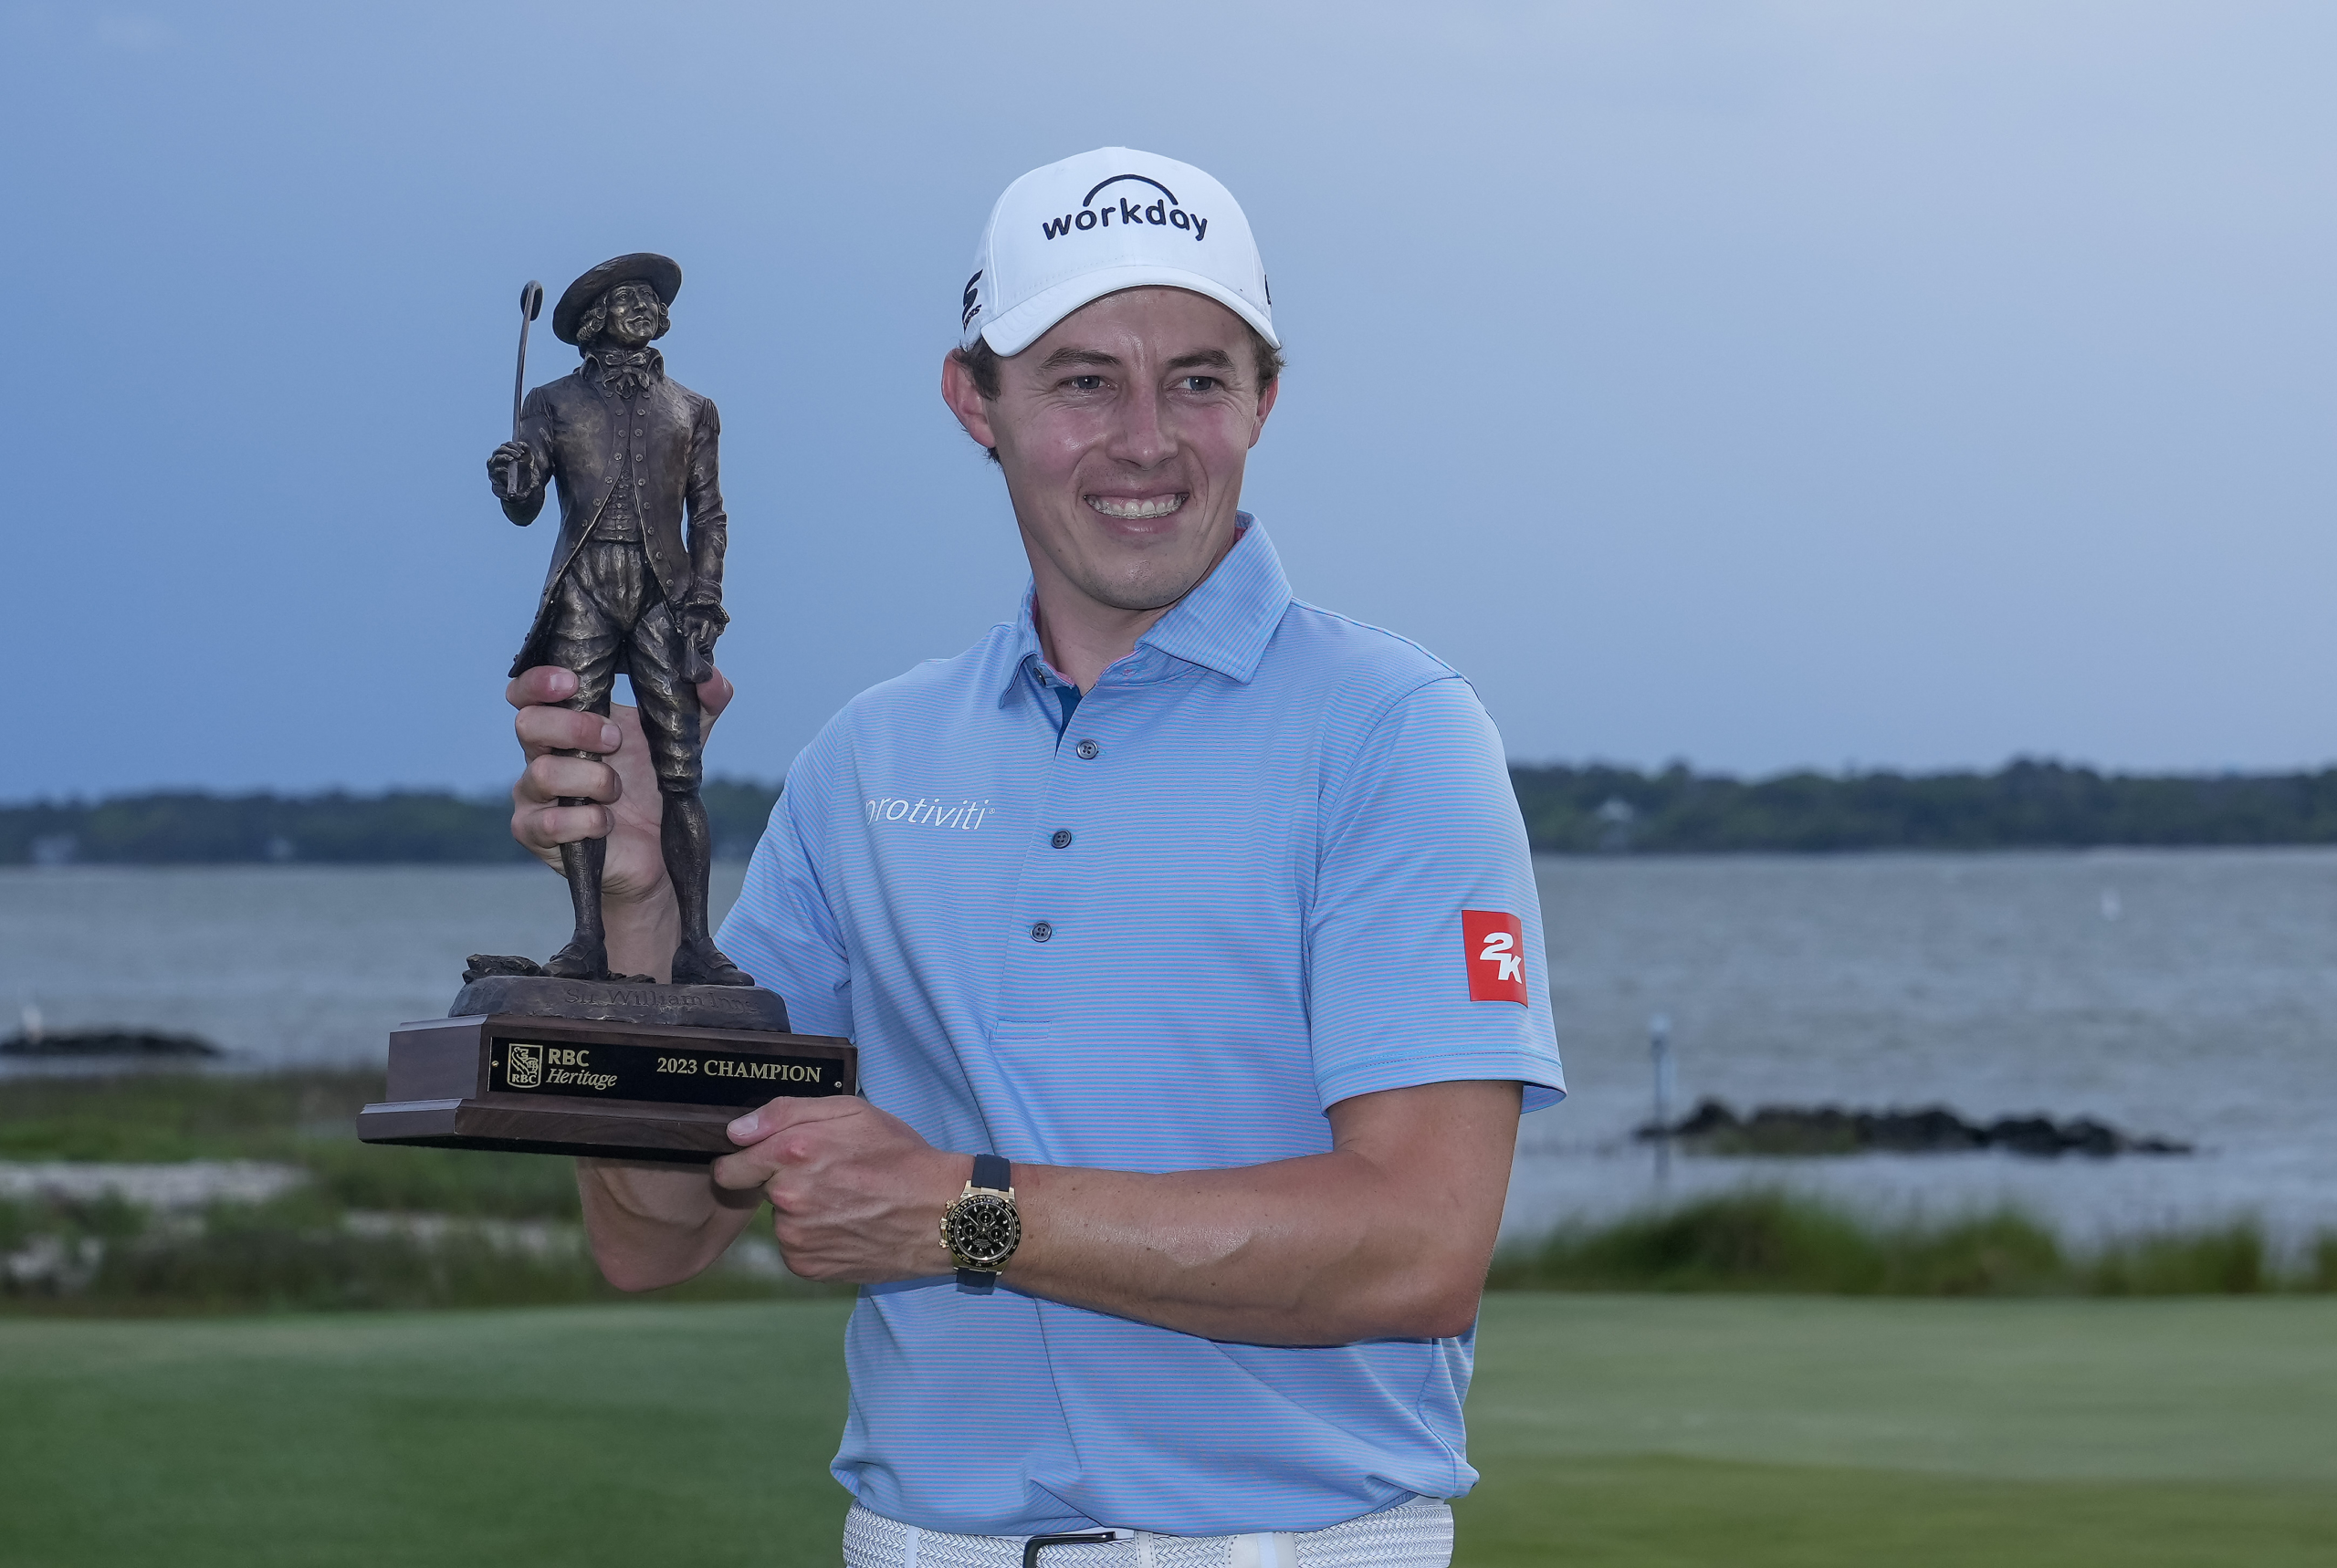 Matt Fitzpatrick emerges as RBC Heritage champion on 3rd playoff hole in crazy Sunday finish